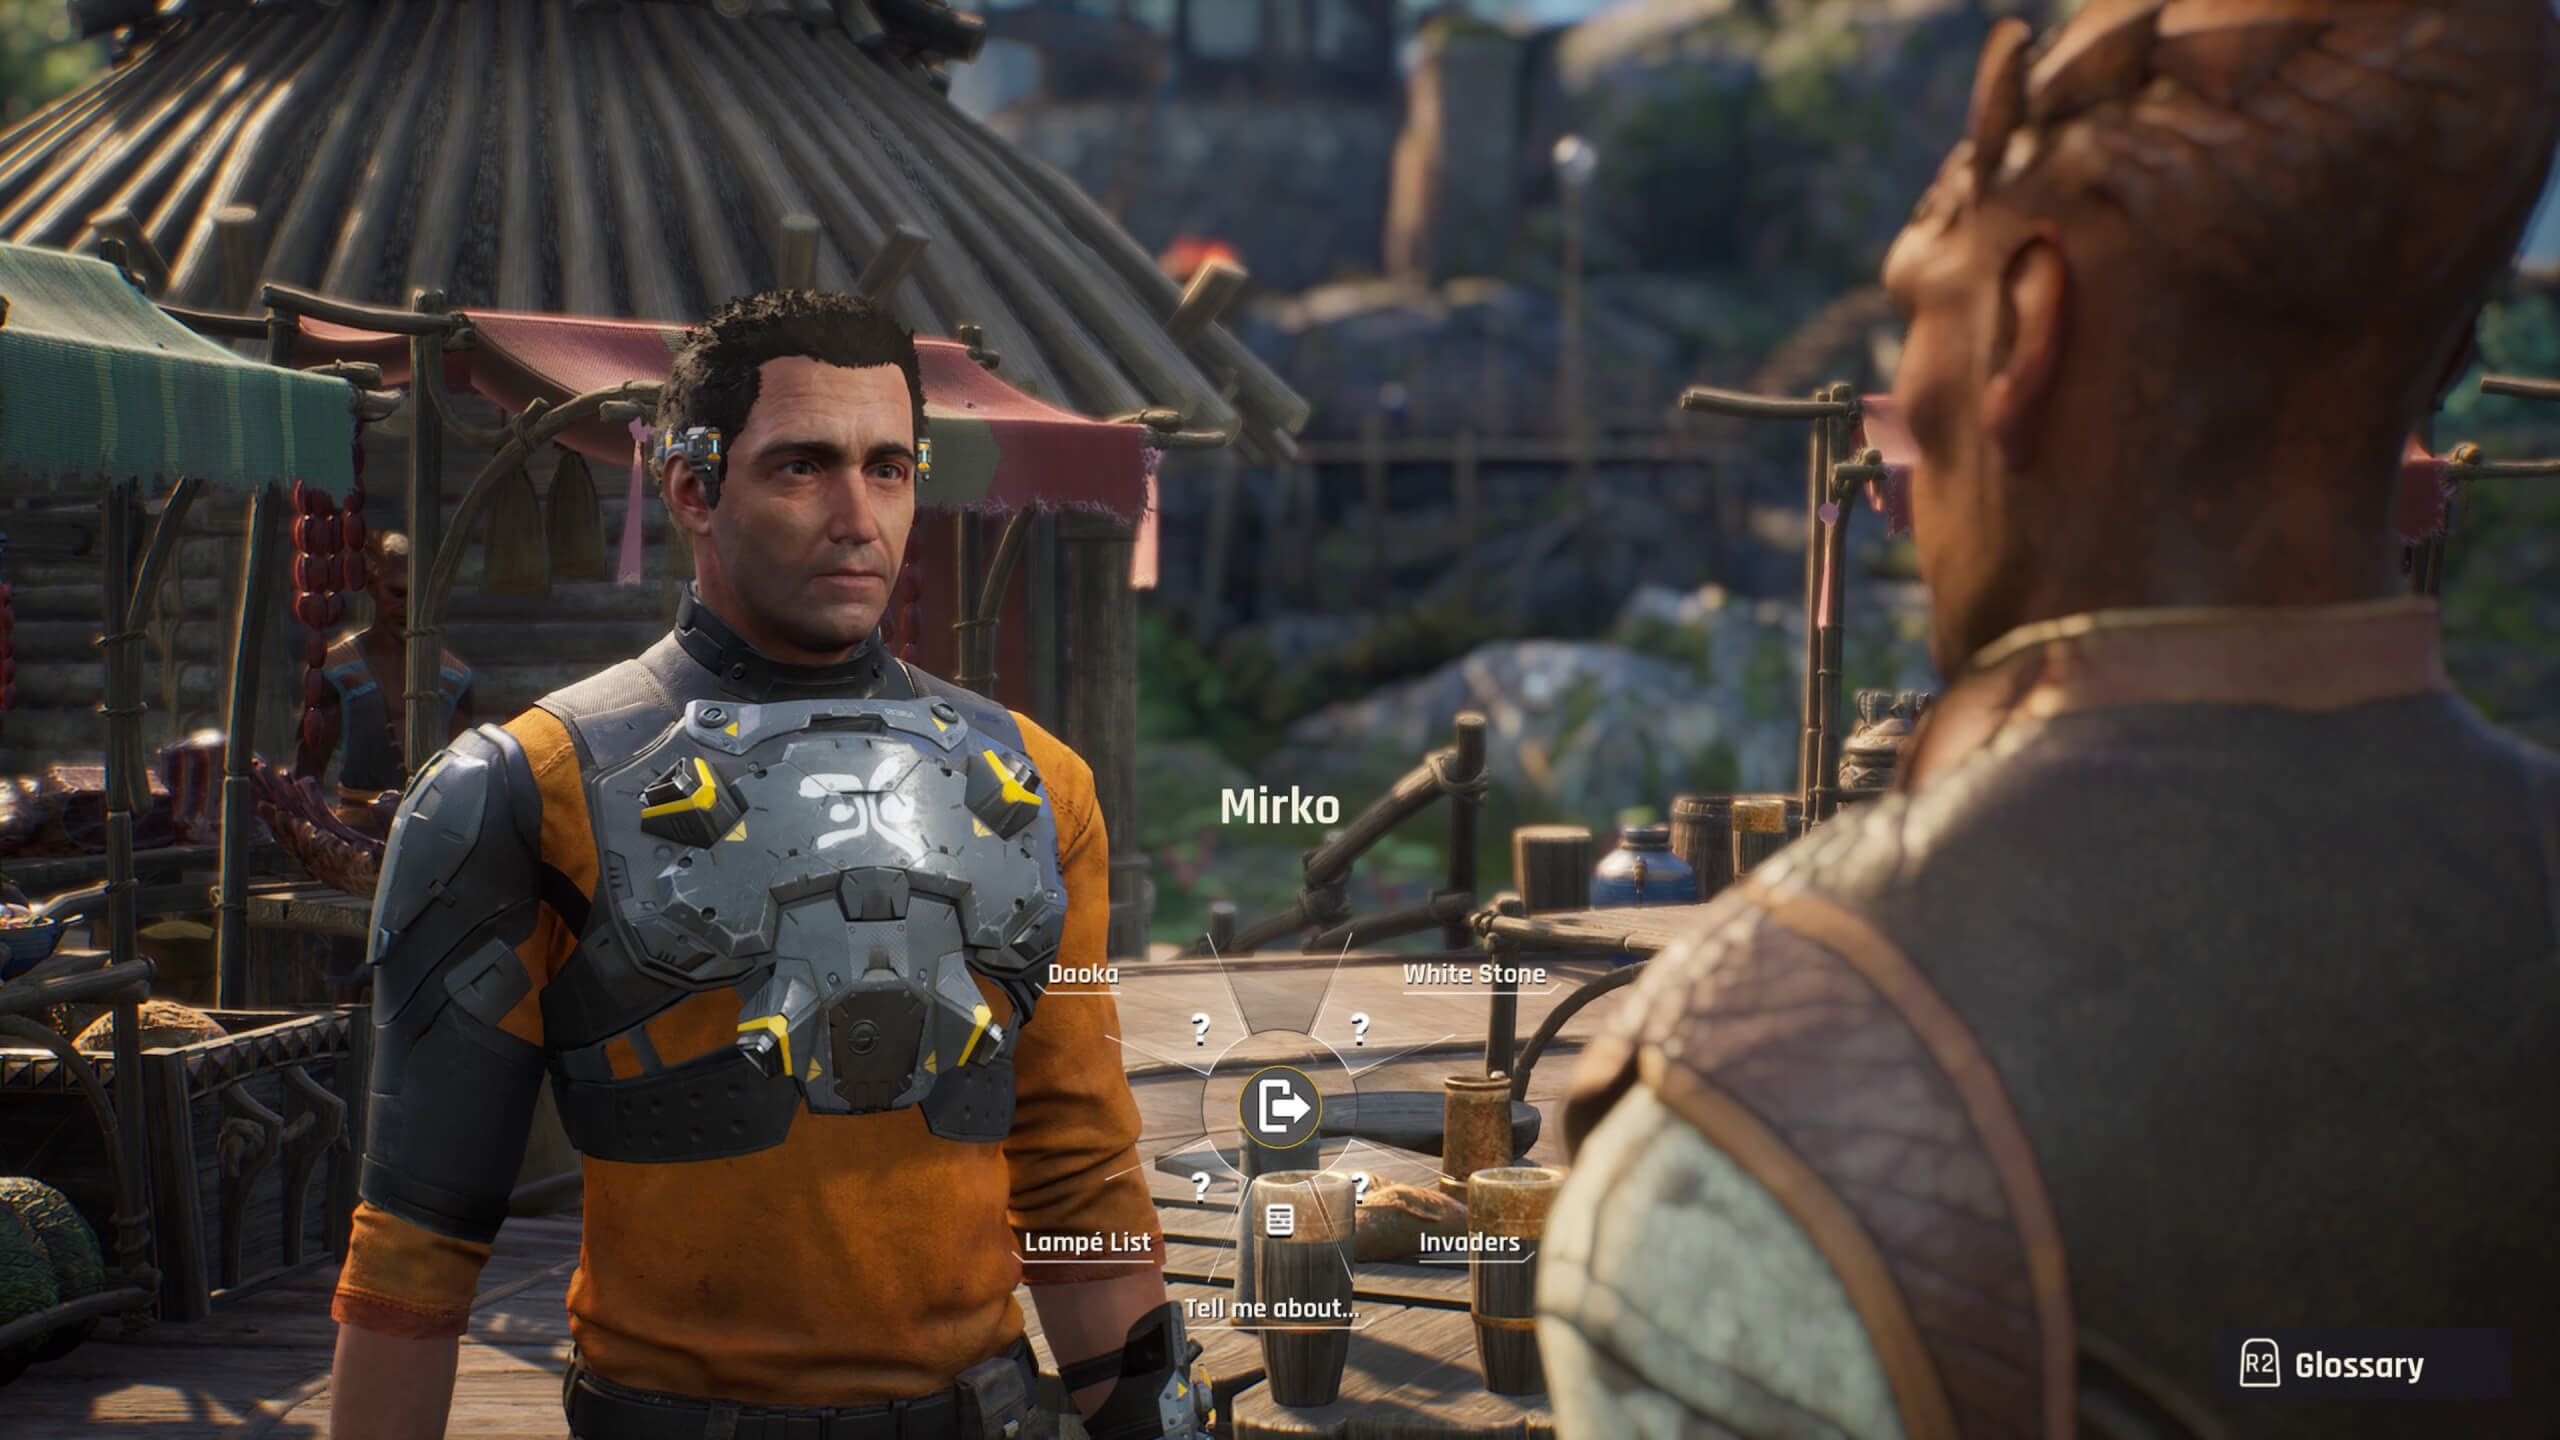 I am talking to one of the Talans whose name seems to be called Miriko. In the centre between the two characters is the dialogue wheel.